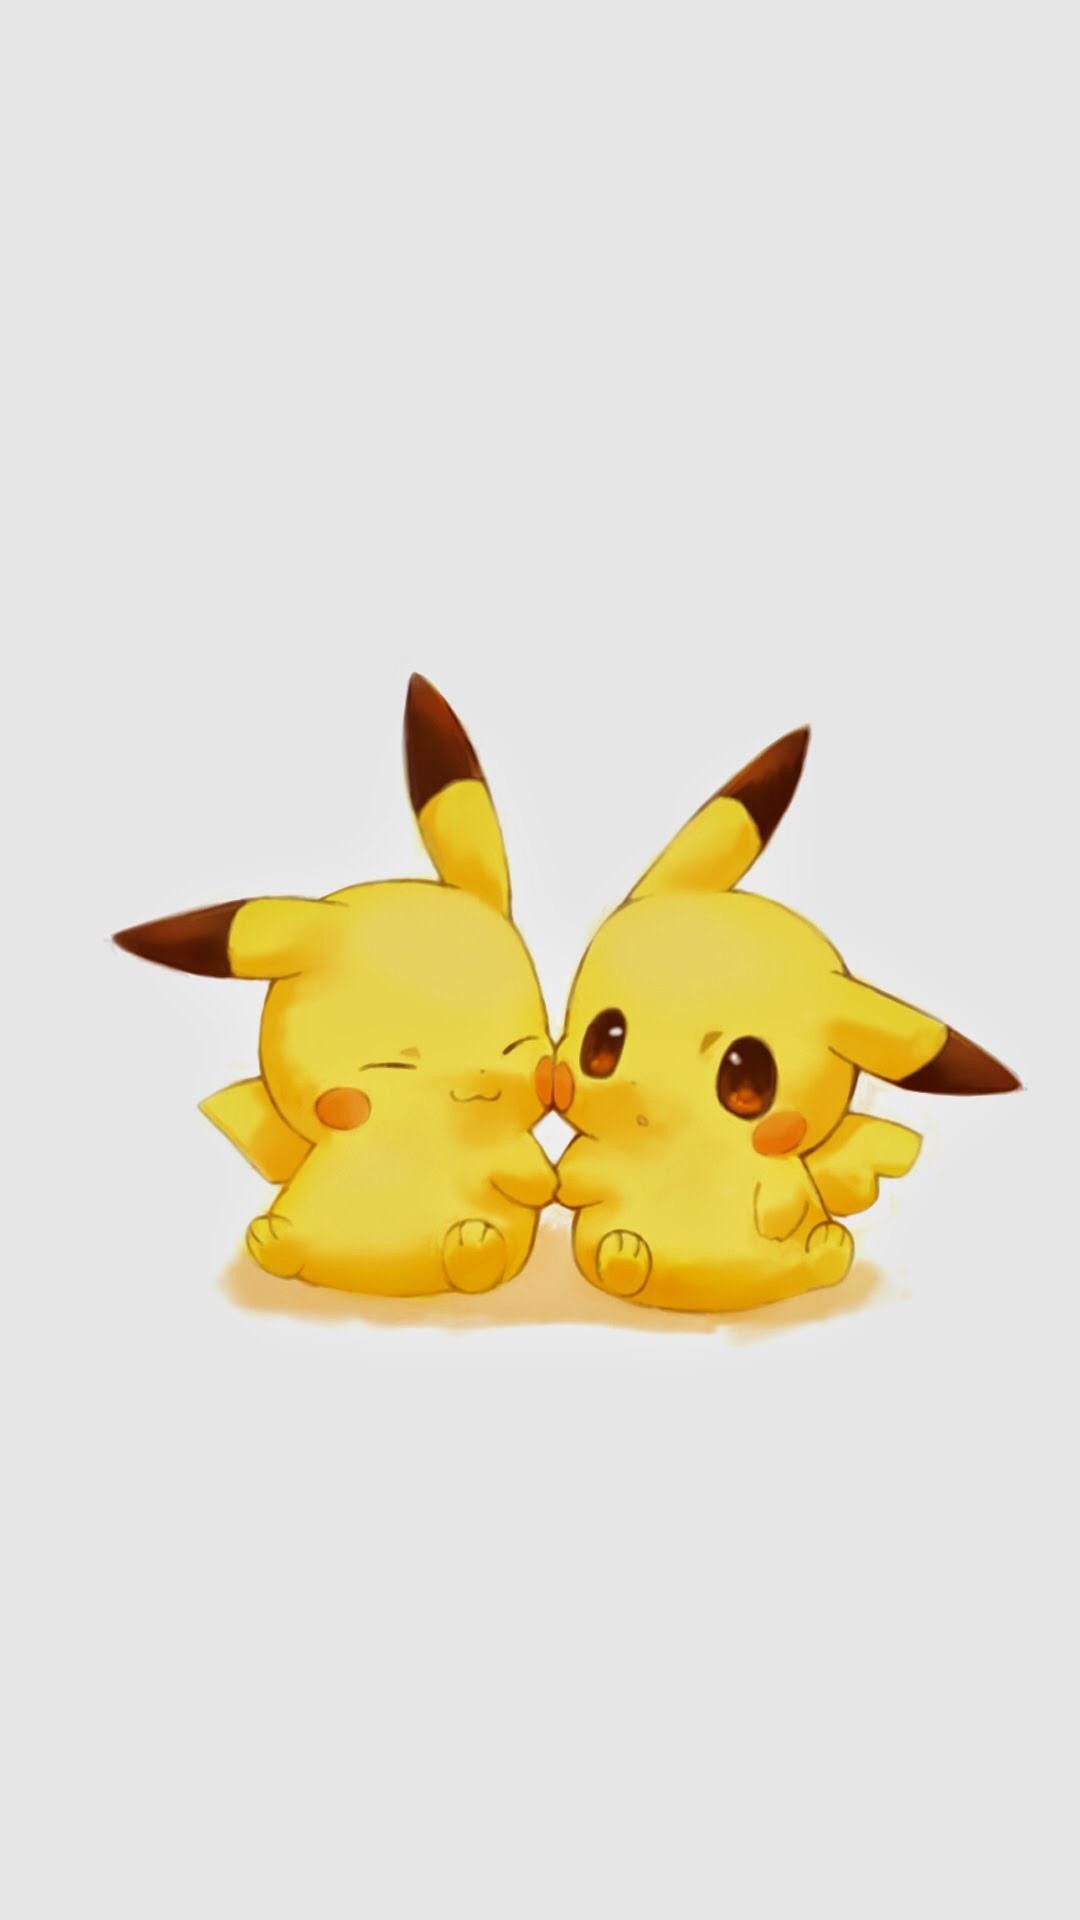 1080x1920 Tap-image-for-more-funny-cute-Pikachu-Pikachu-